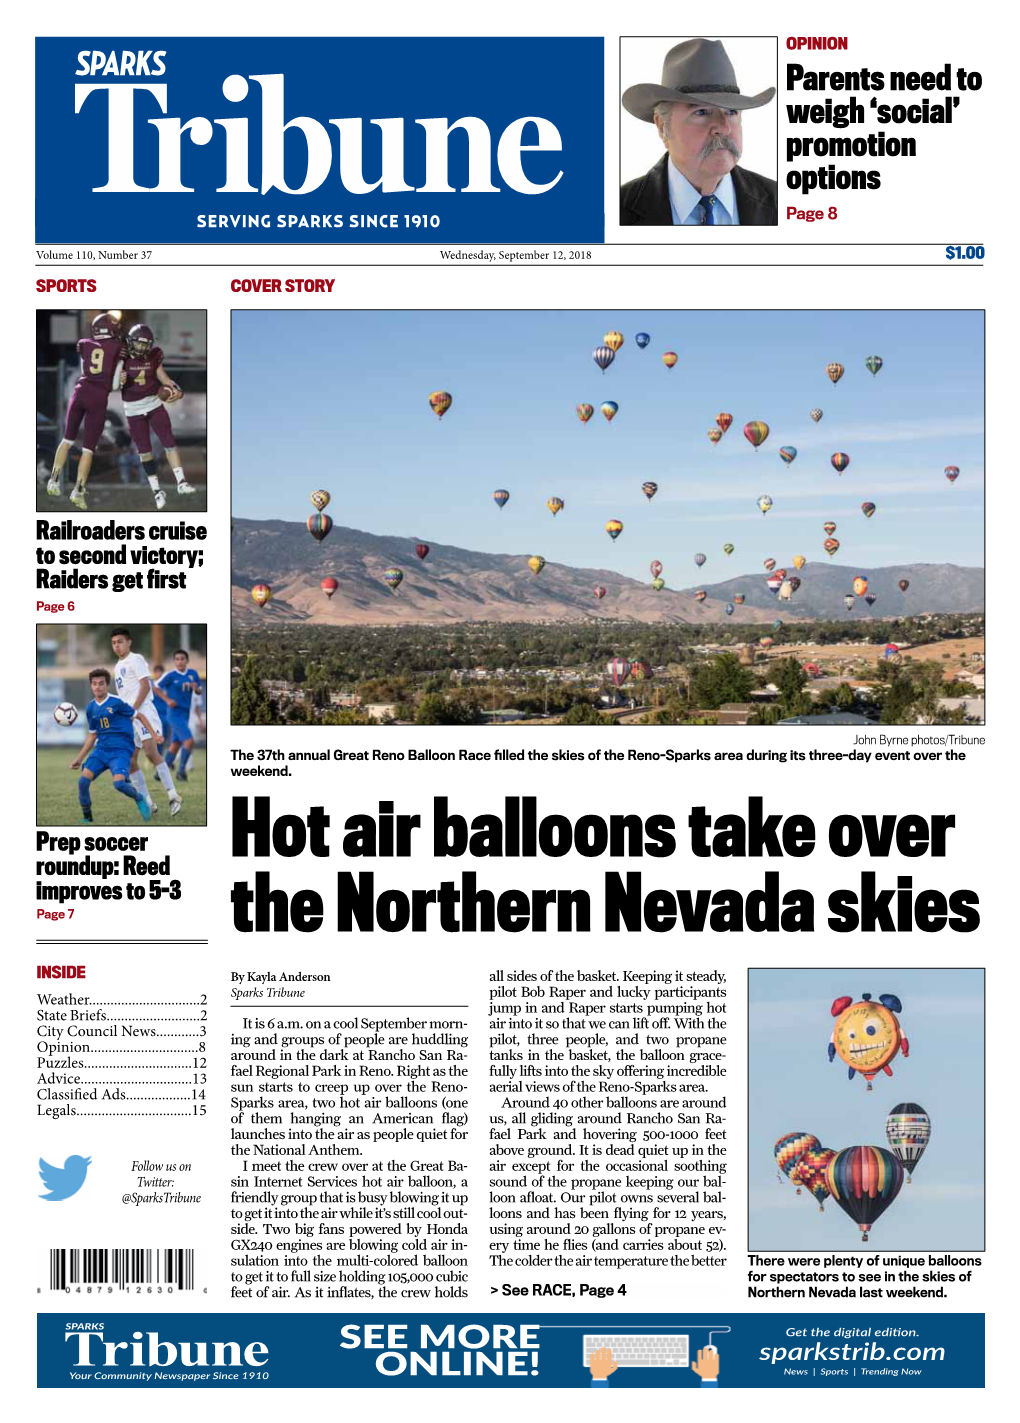 Hot Air Balloons Take Over the Northern Nevada Skies